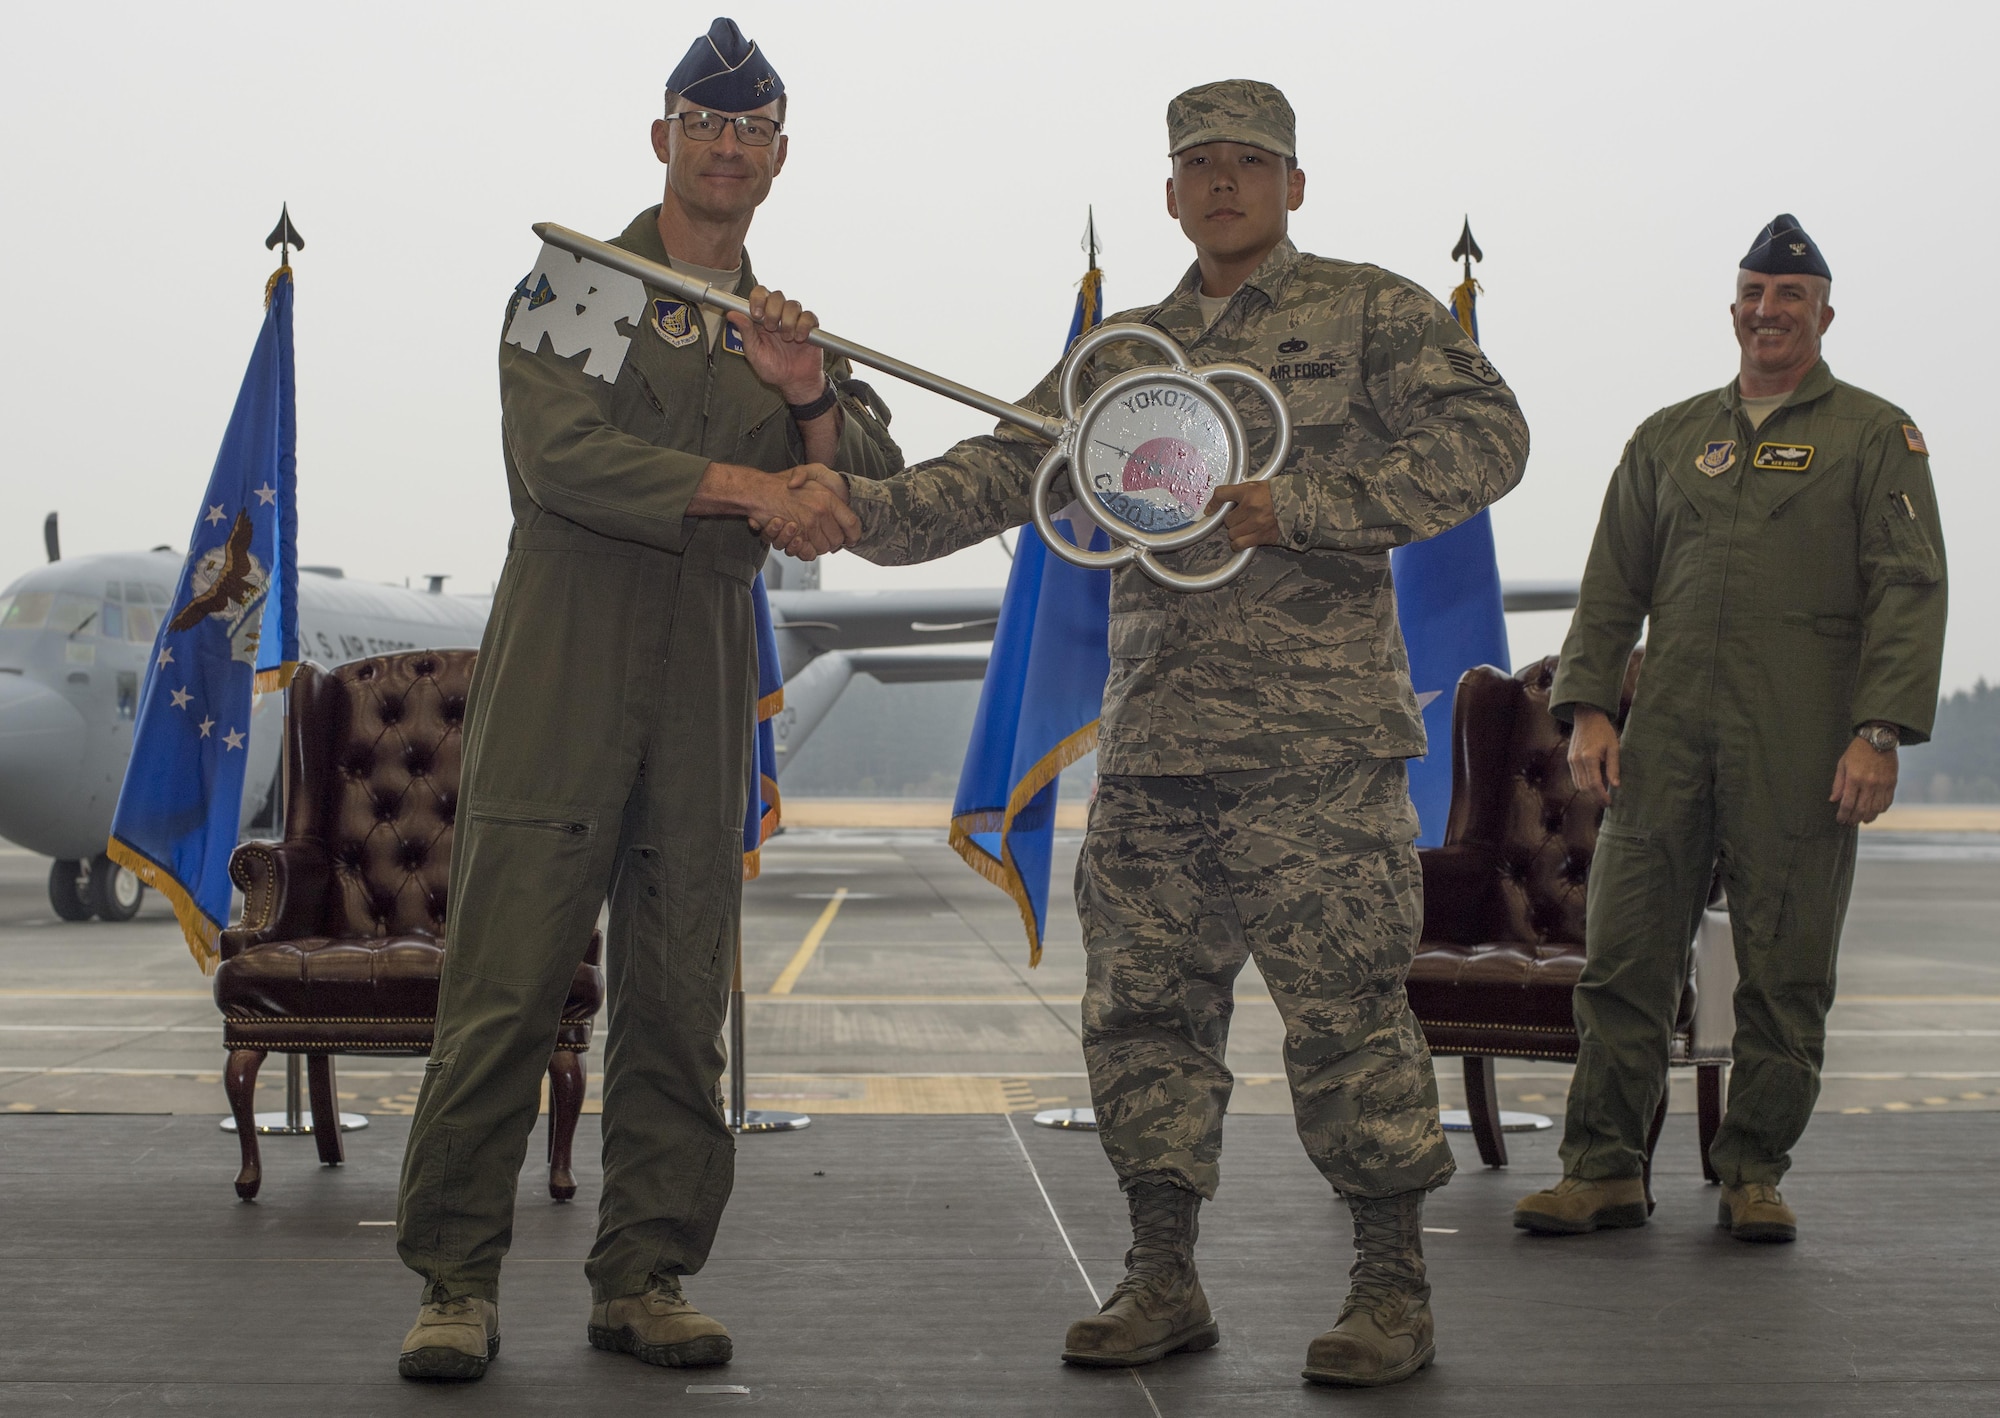 Maj. Gen. Mark Dillon, Pacific Air Forces vice commander, hands a ceremonial key to Staff Sgt. Gene Phonthipsavath, 374th Aircraft Maintenance Squadron dedicated crew chief, during a C-130J Super Hercules arrival ceremony at Yokota Air Base, Japan, March 6, 2016. Compared to older C-130s, the J model climbs faster and higher, flies farther at a higher cruise speed, and takes off and lands in a shorter distance. (U.S. Air Force photo by Staff Sgt. David Owsianka)